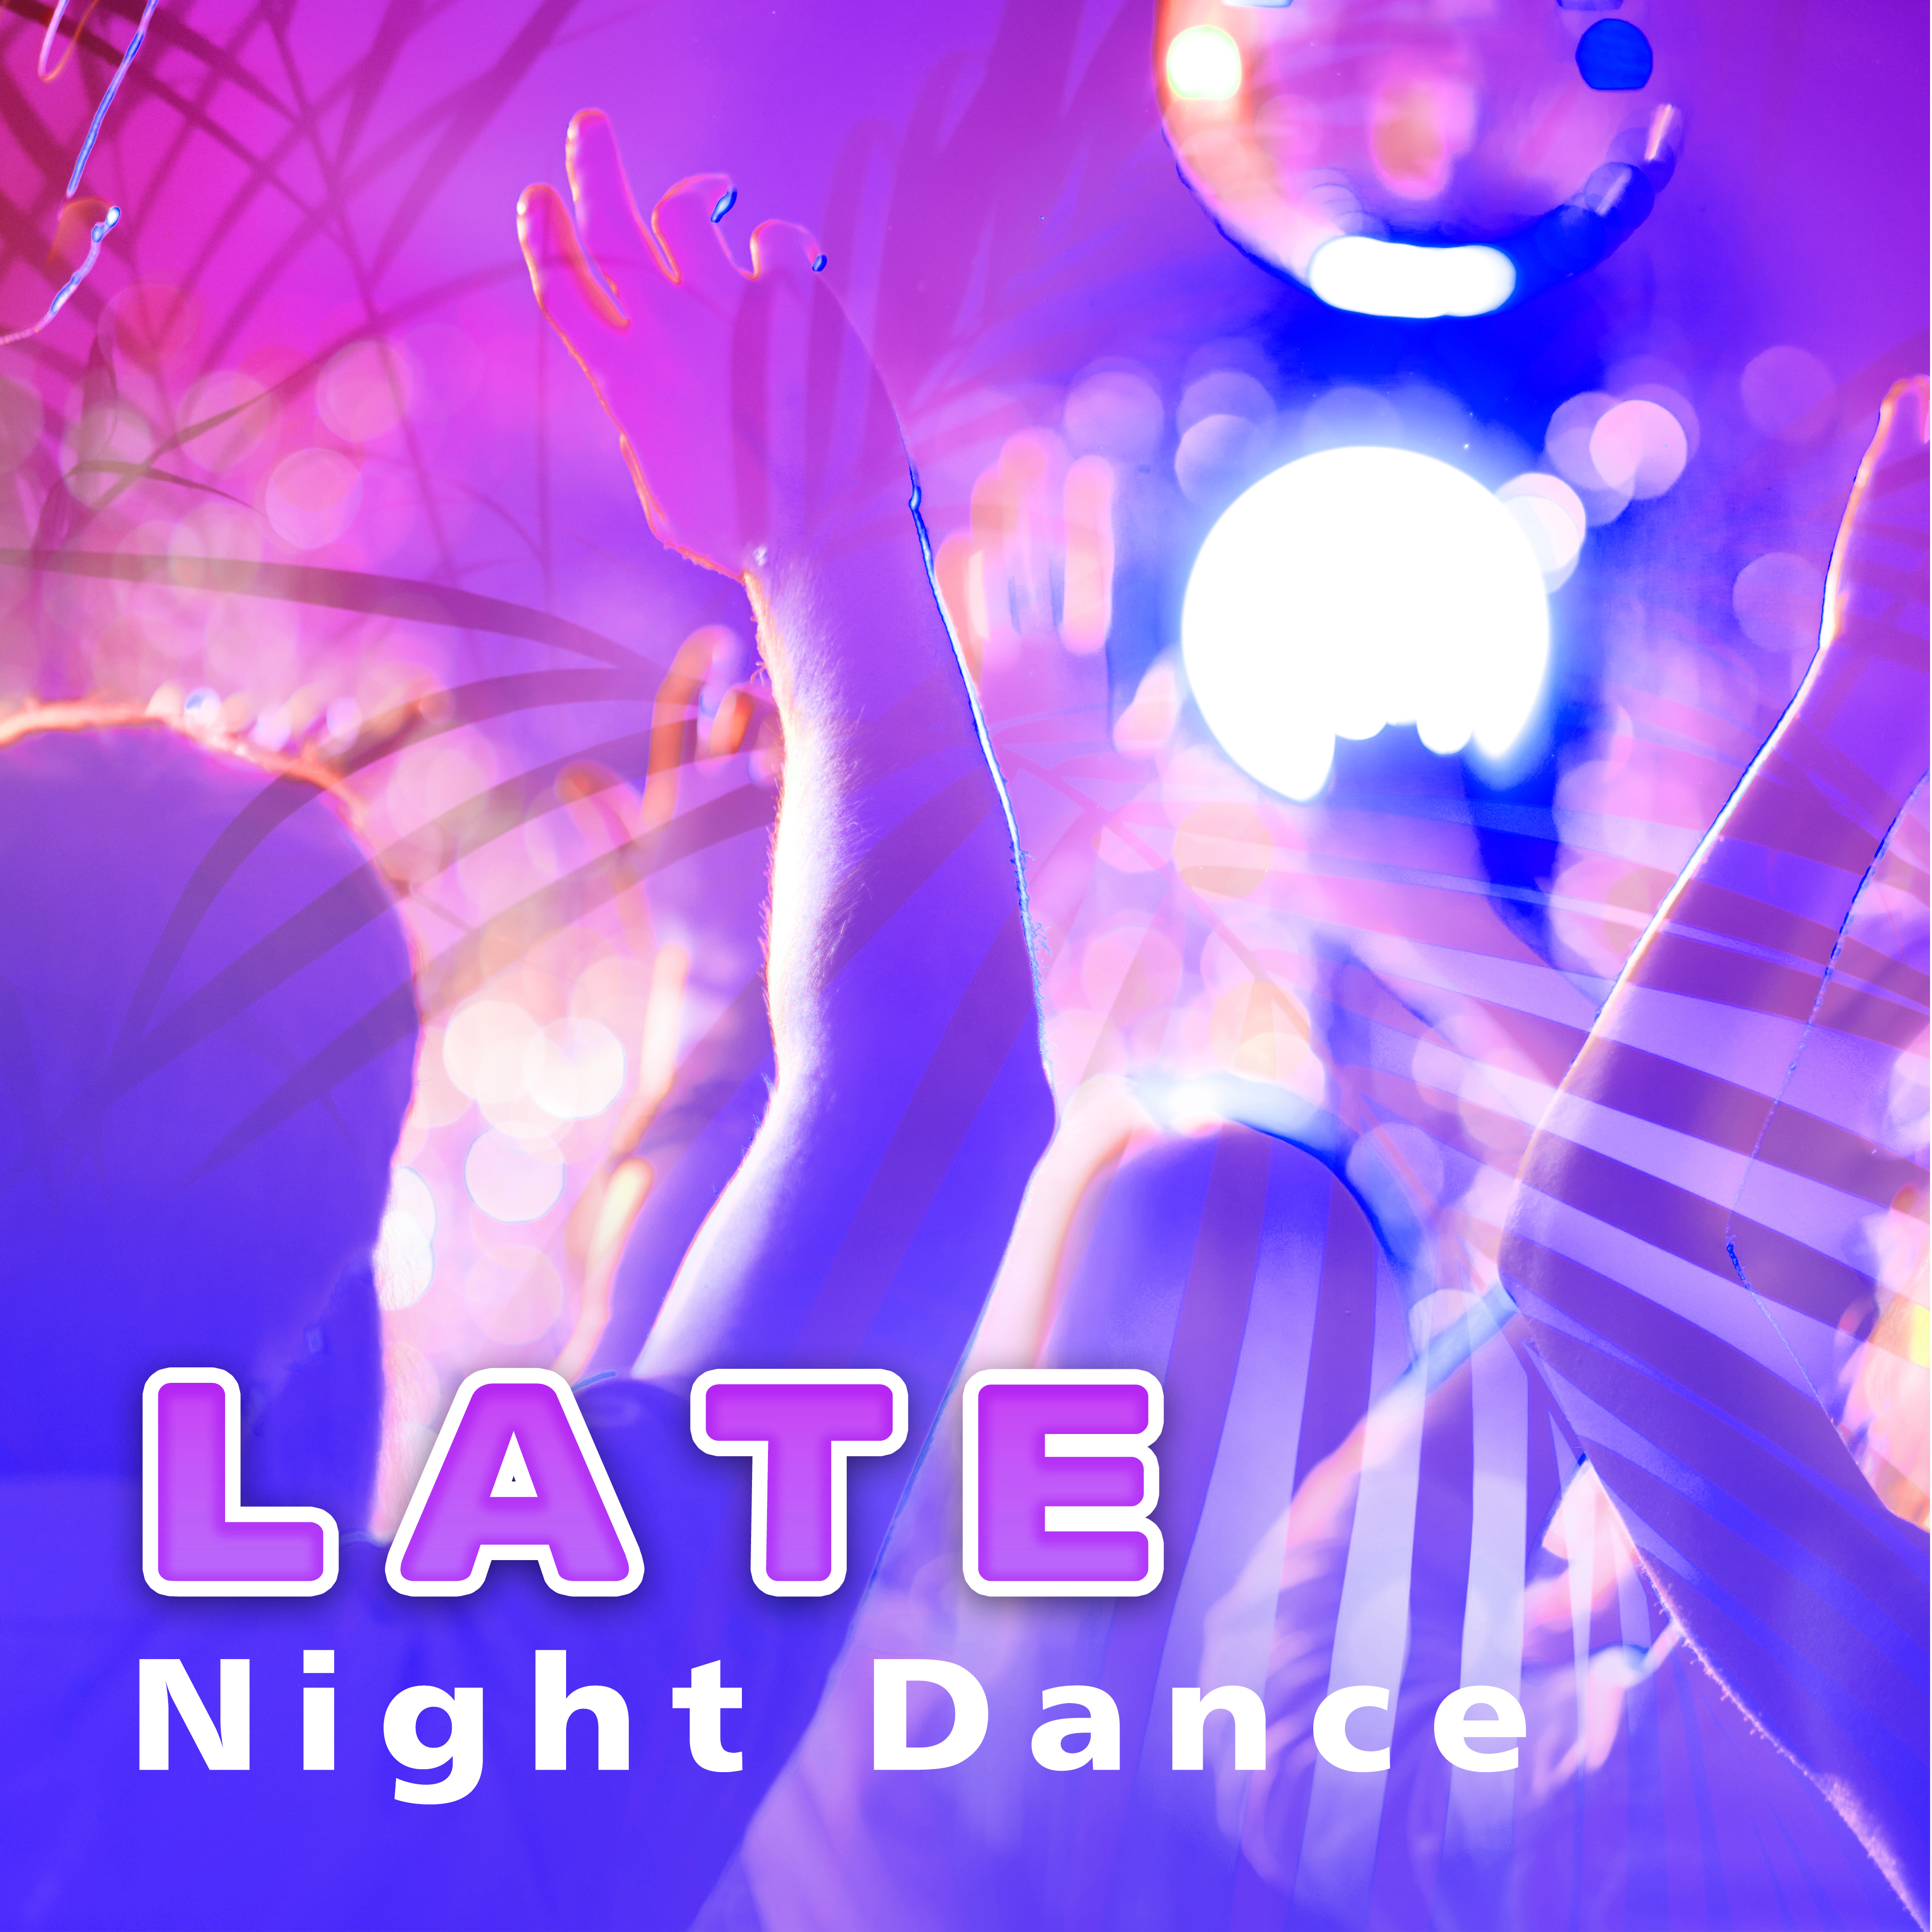 Late Night Dance  Ibiza Party Time, Evening Fun, Night Chill Out, Summer 2017